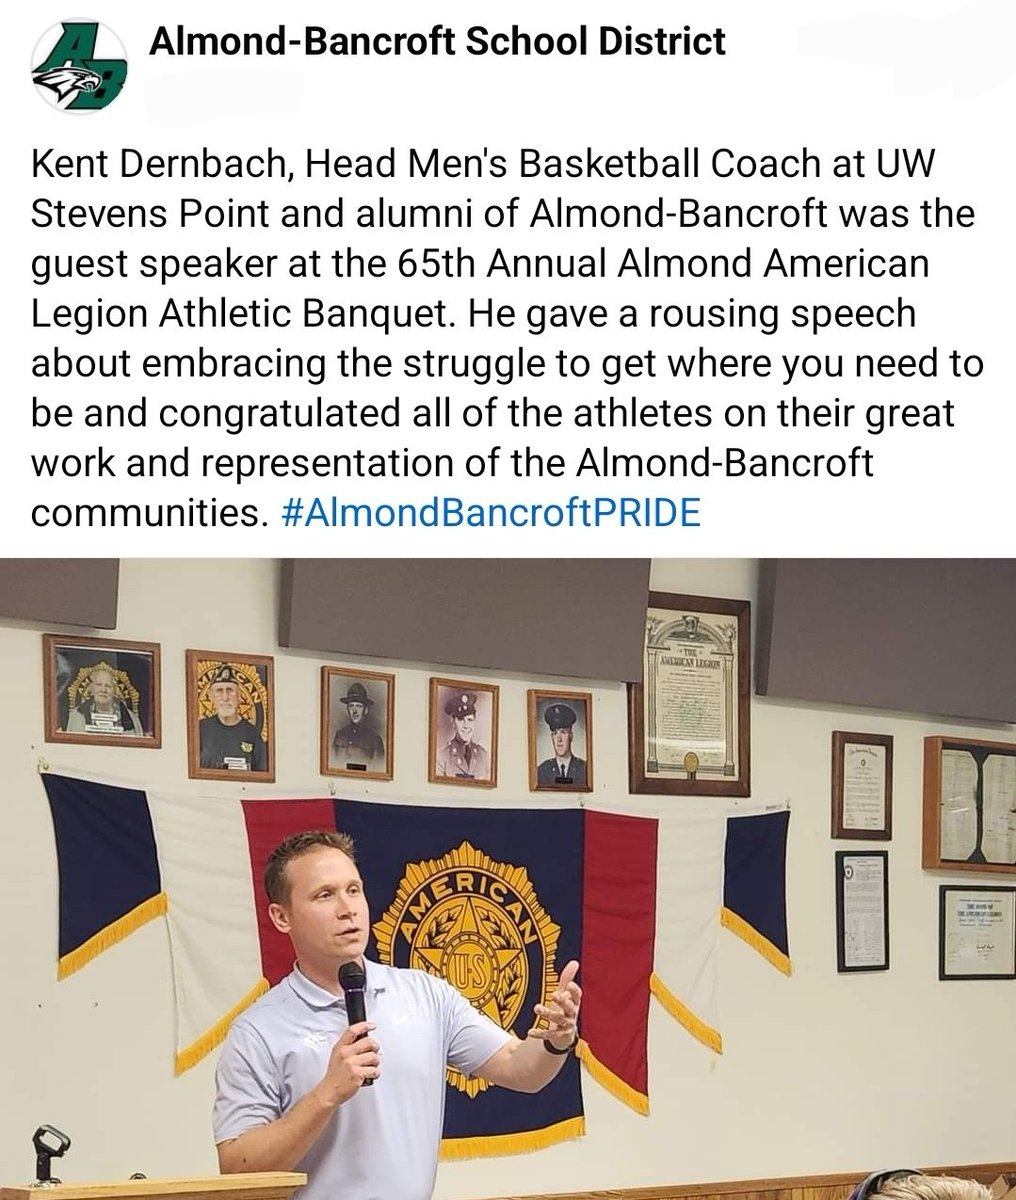 Glad to see UW-Stevens Point Men's Basketball Head Coach Kent Dernbach active in the Almond-Bancroft community, where he grew up.

#whyd3